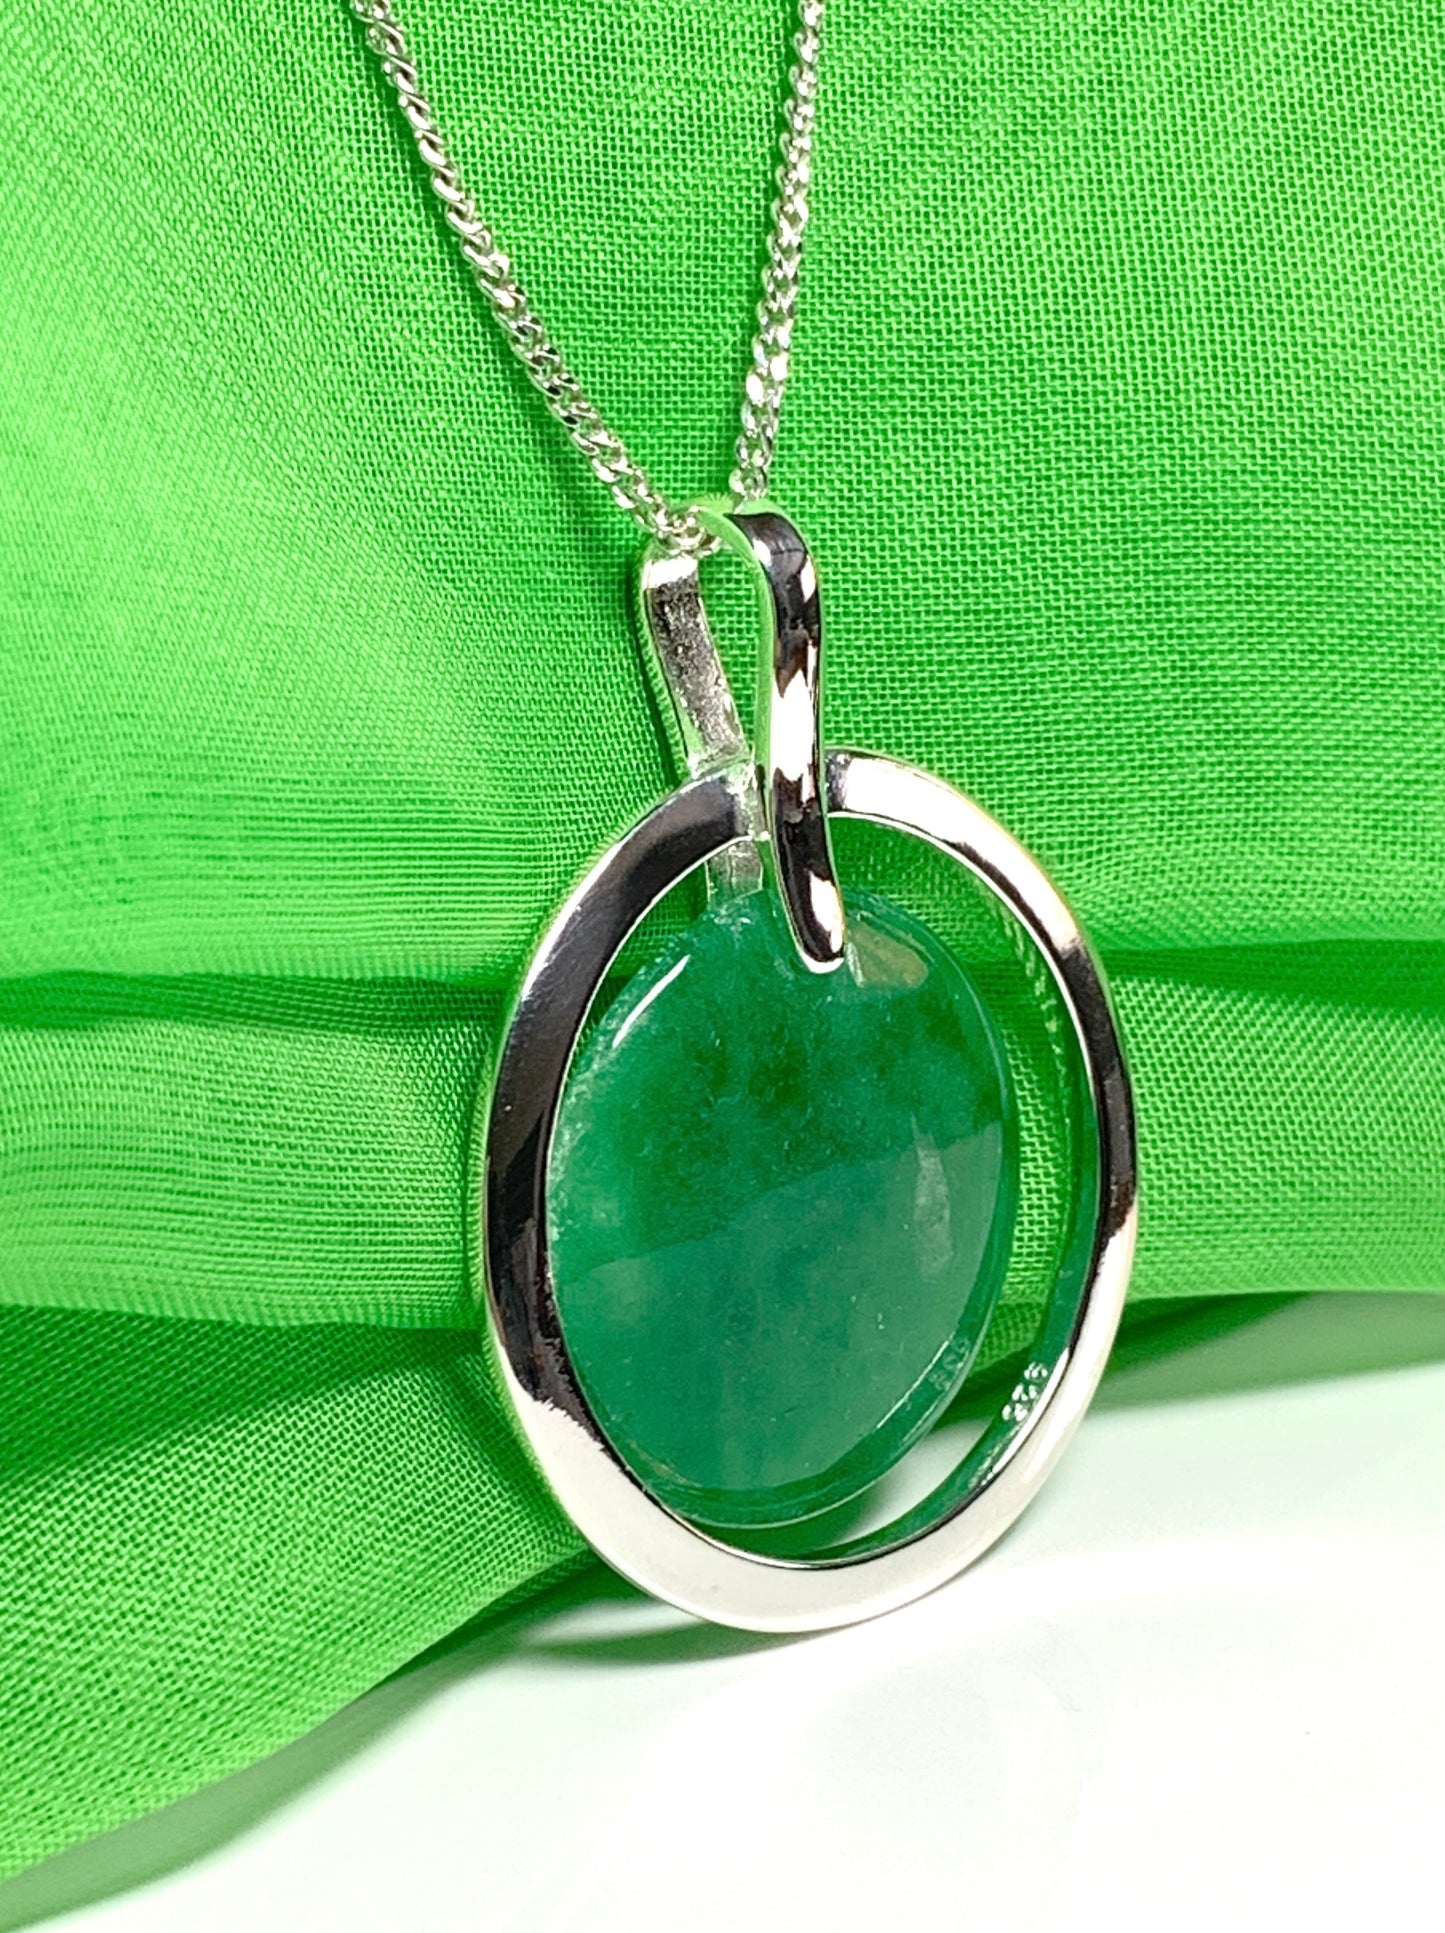 Large silver round shaped dark green real jade pendant necklace